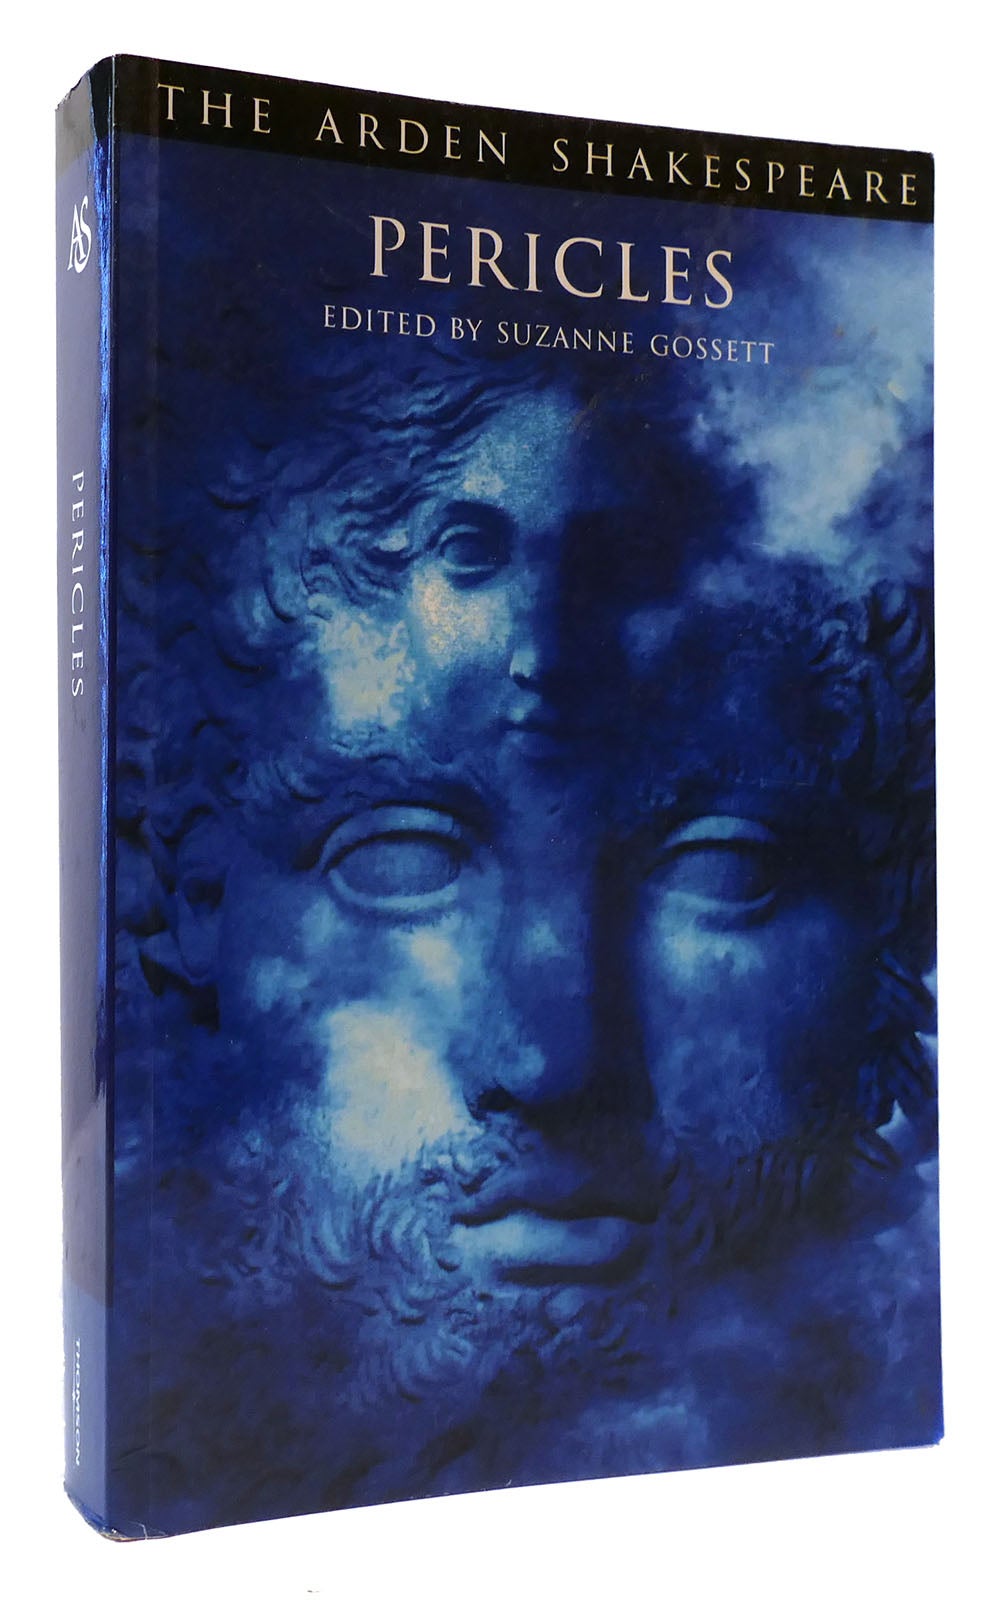 Arden　Shakespeare　PERICLES　Edition　Thus;　Third　William　Gossett　Shakespeare　Suzanne　First　The　Printing　Series　Third